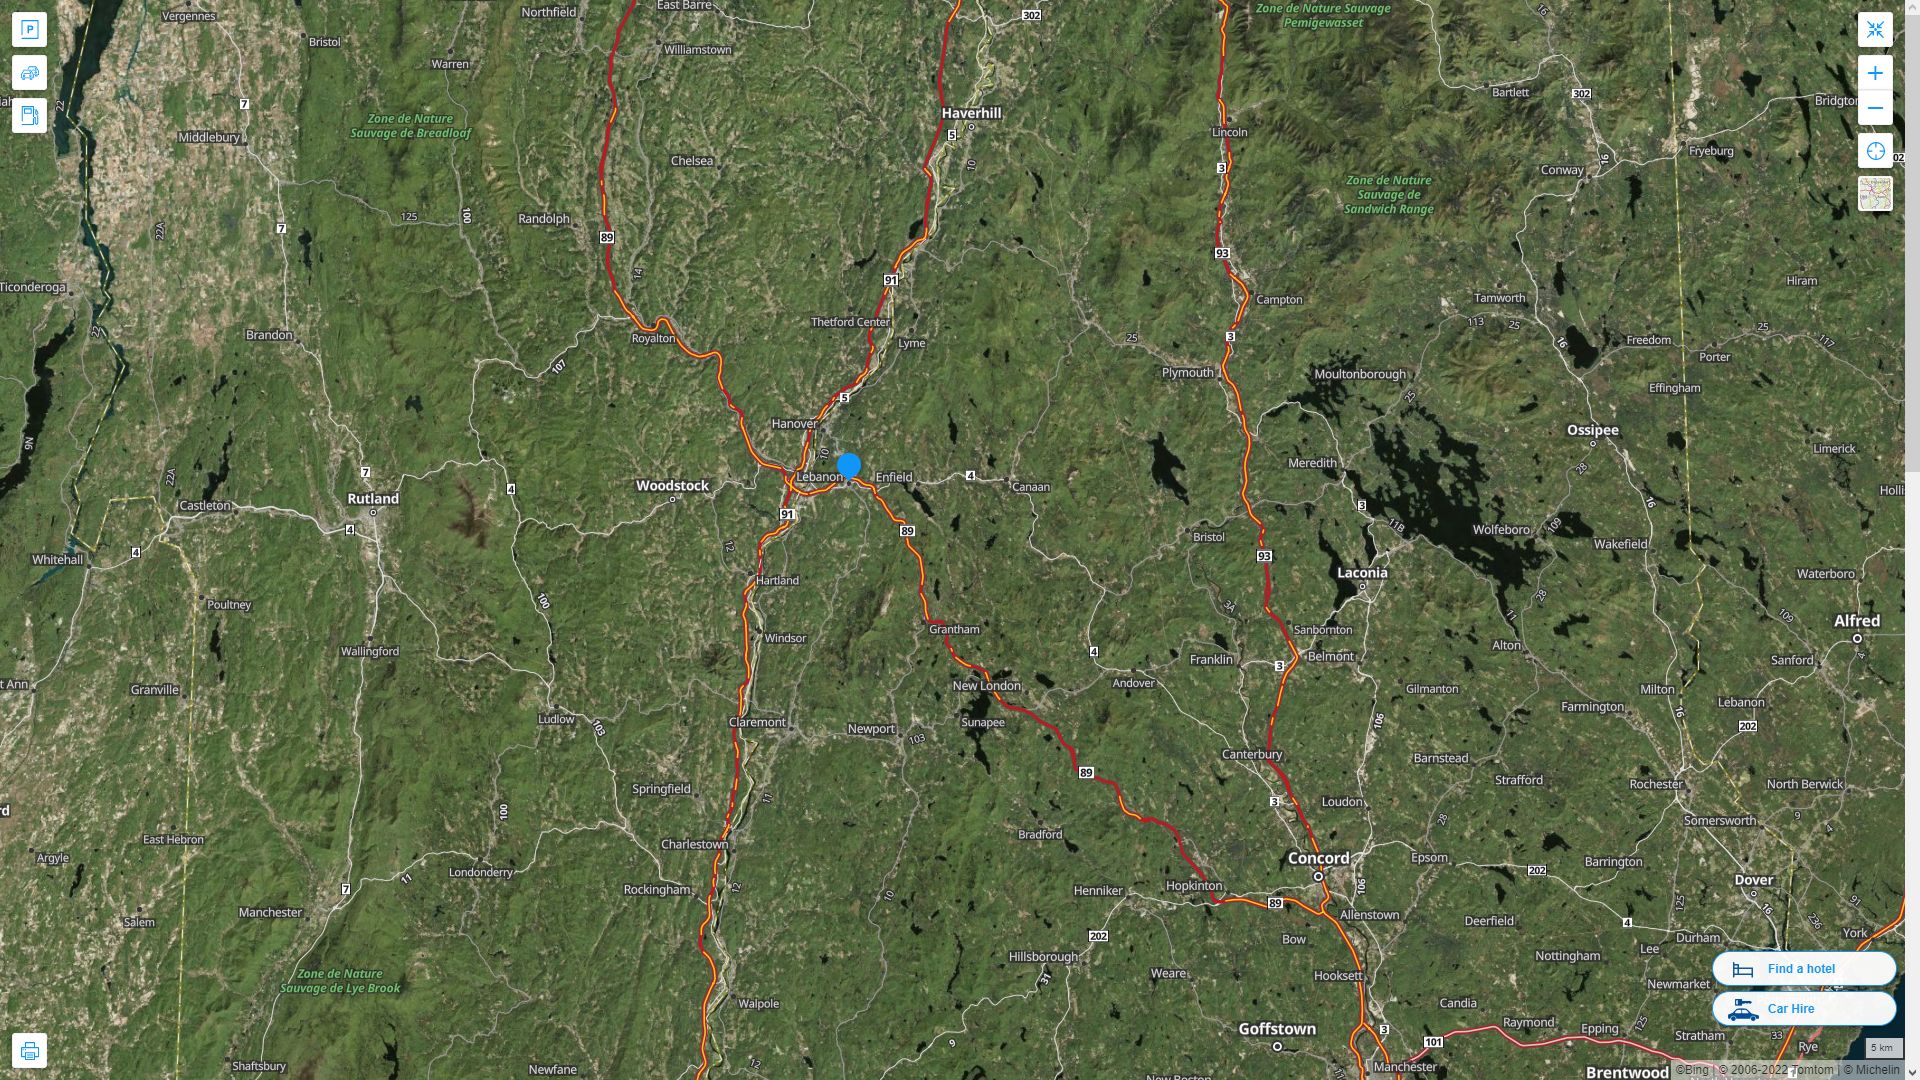 Lebanon New Hampshire Highway and Road Map with Satellite View